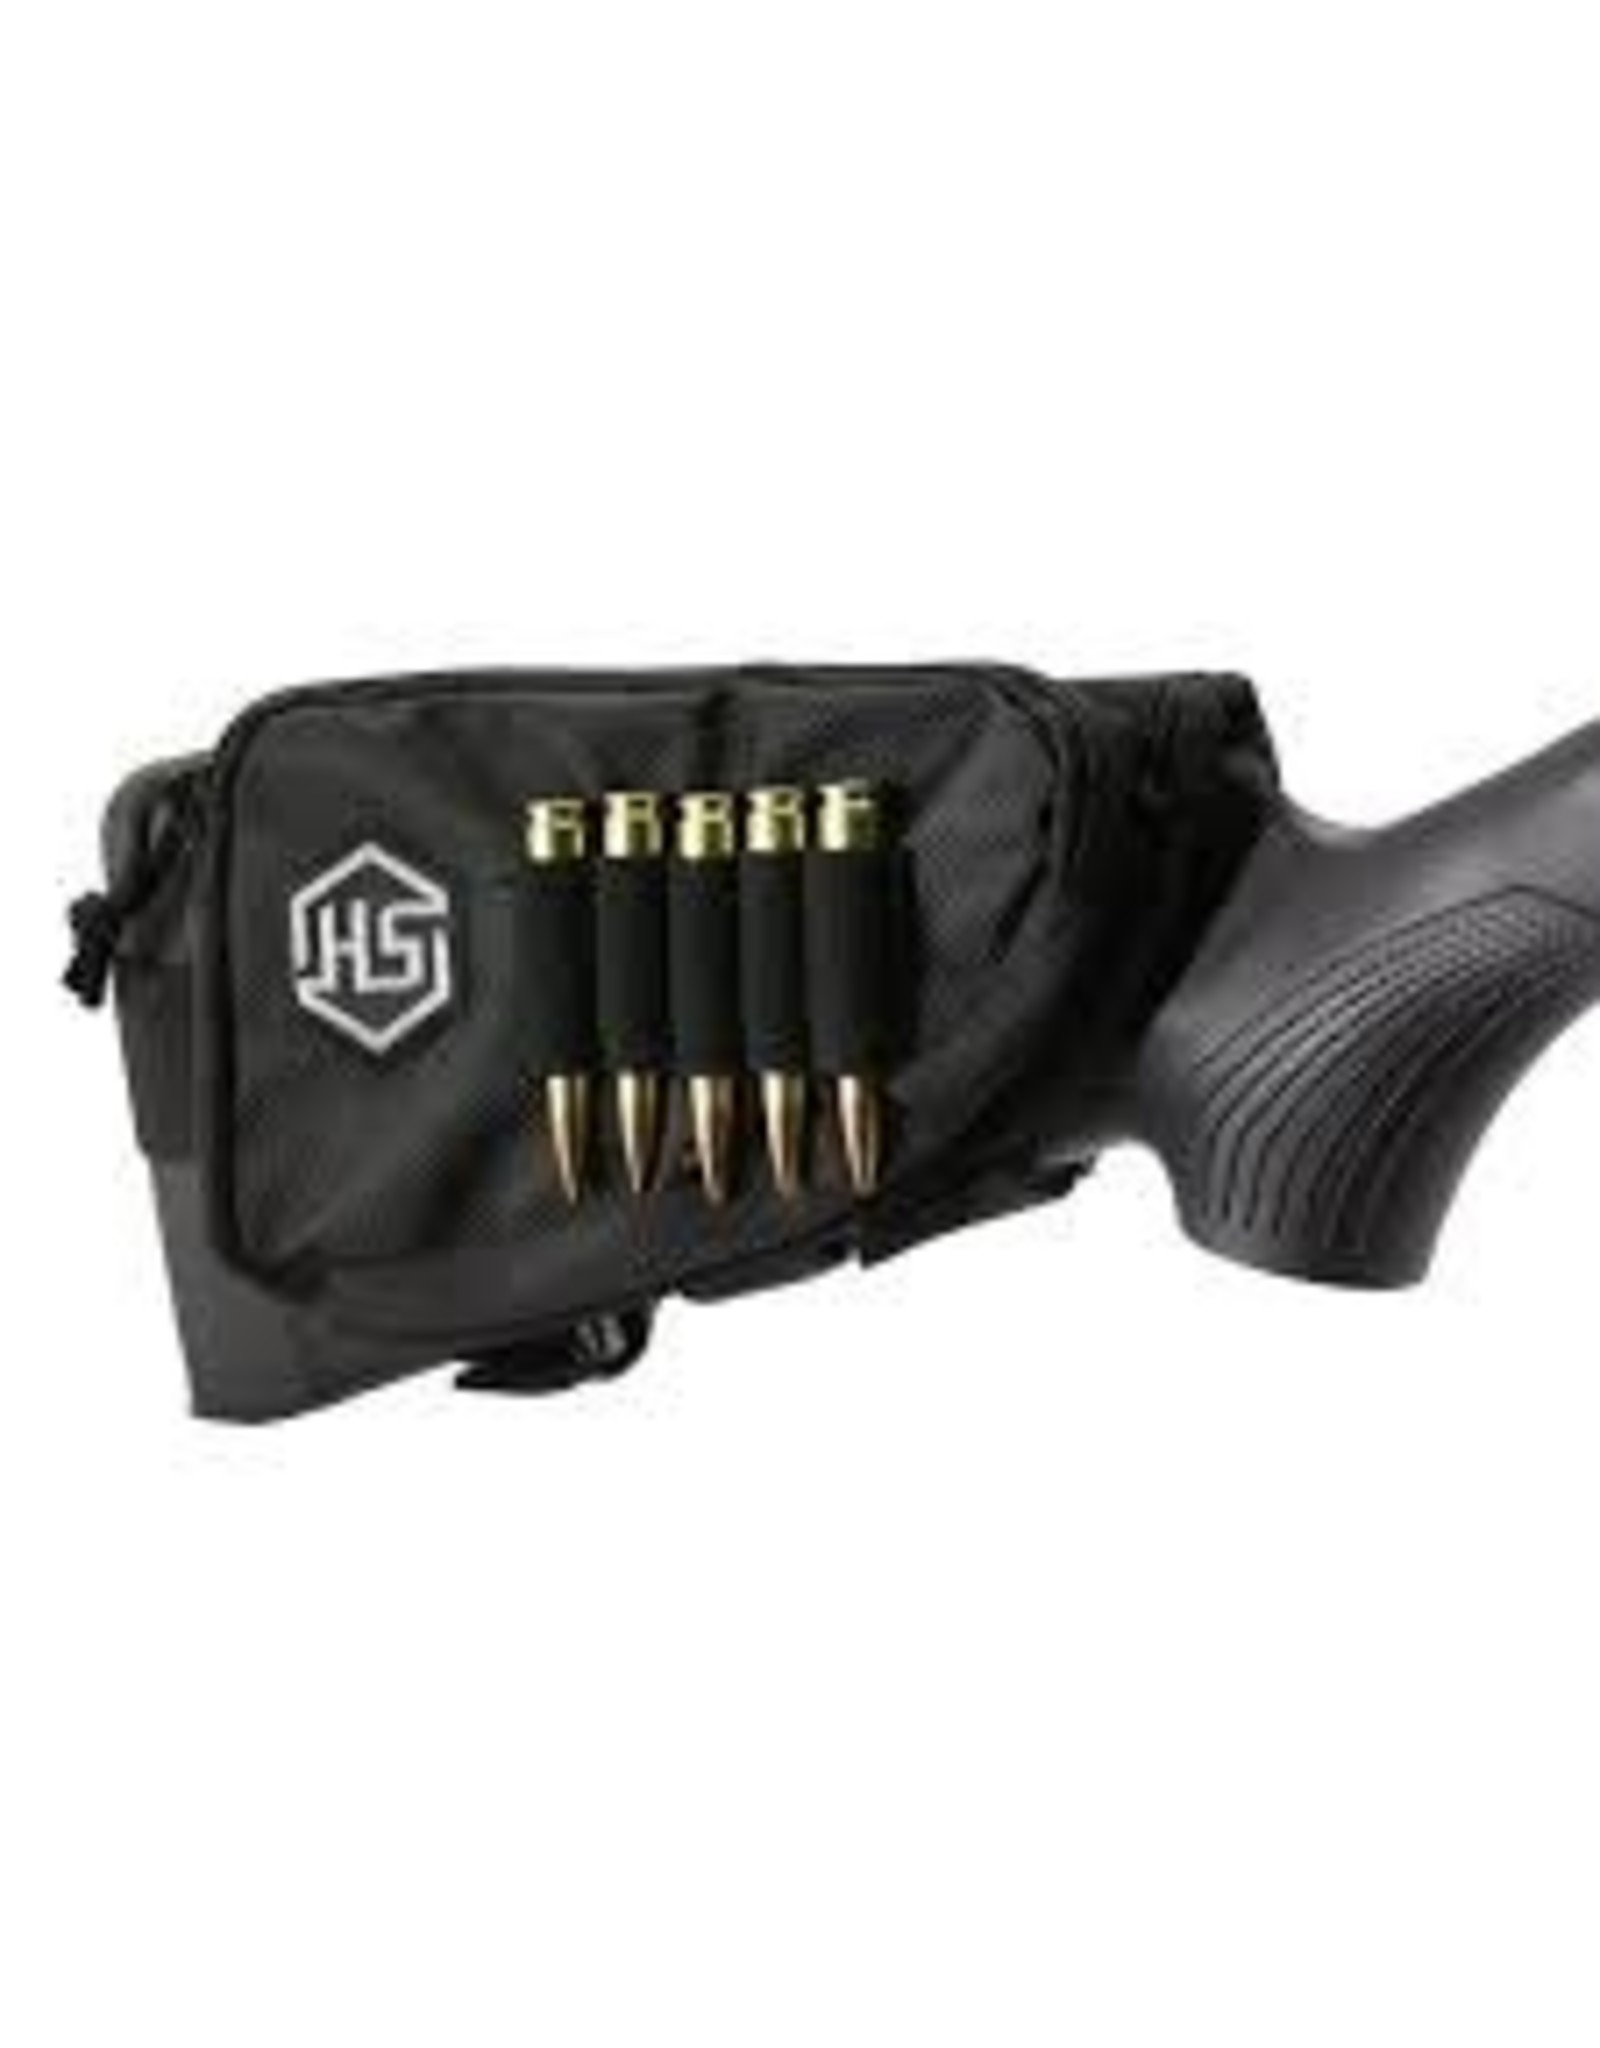 HUNTER SPECIALTY HS RIFLE SHELL HOLDER POUCH